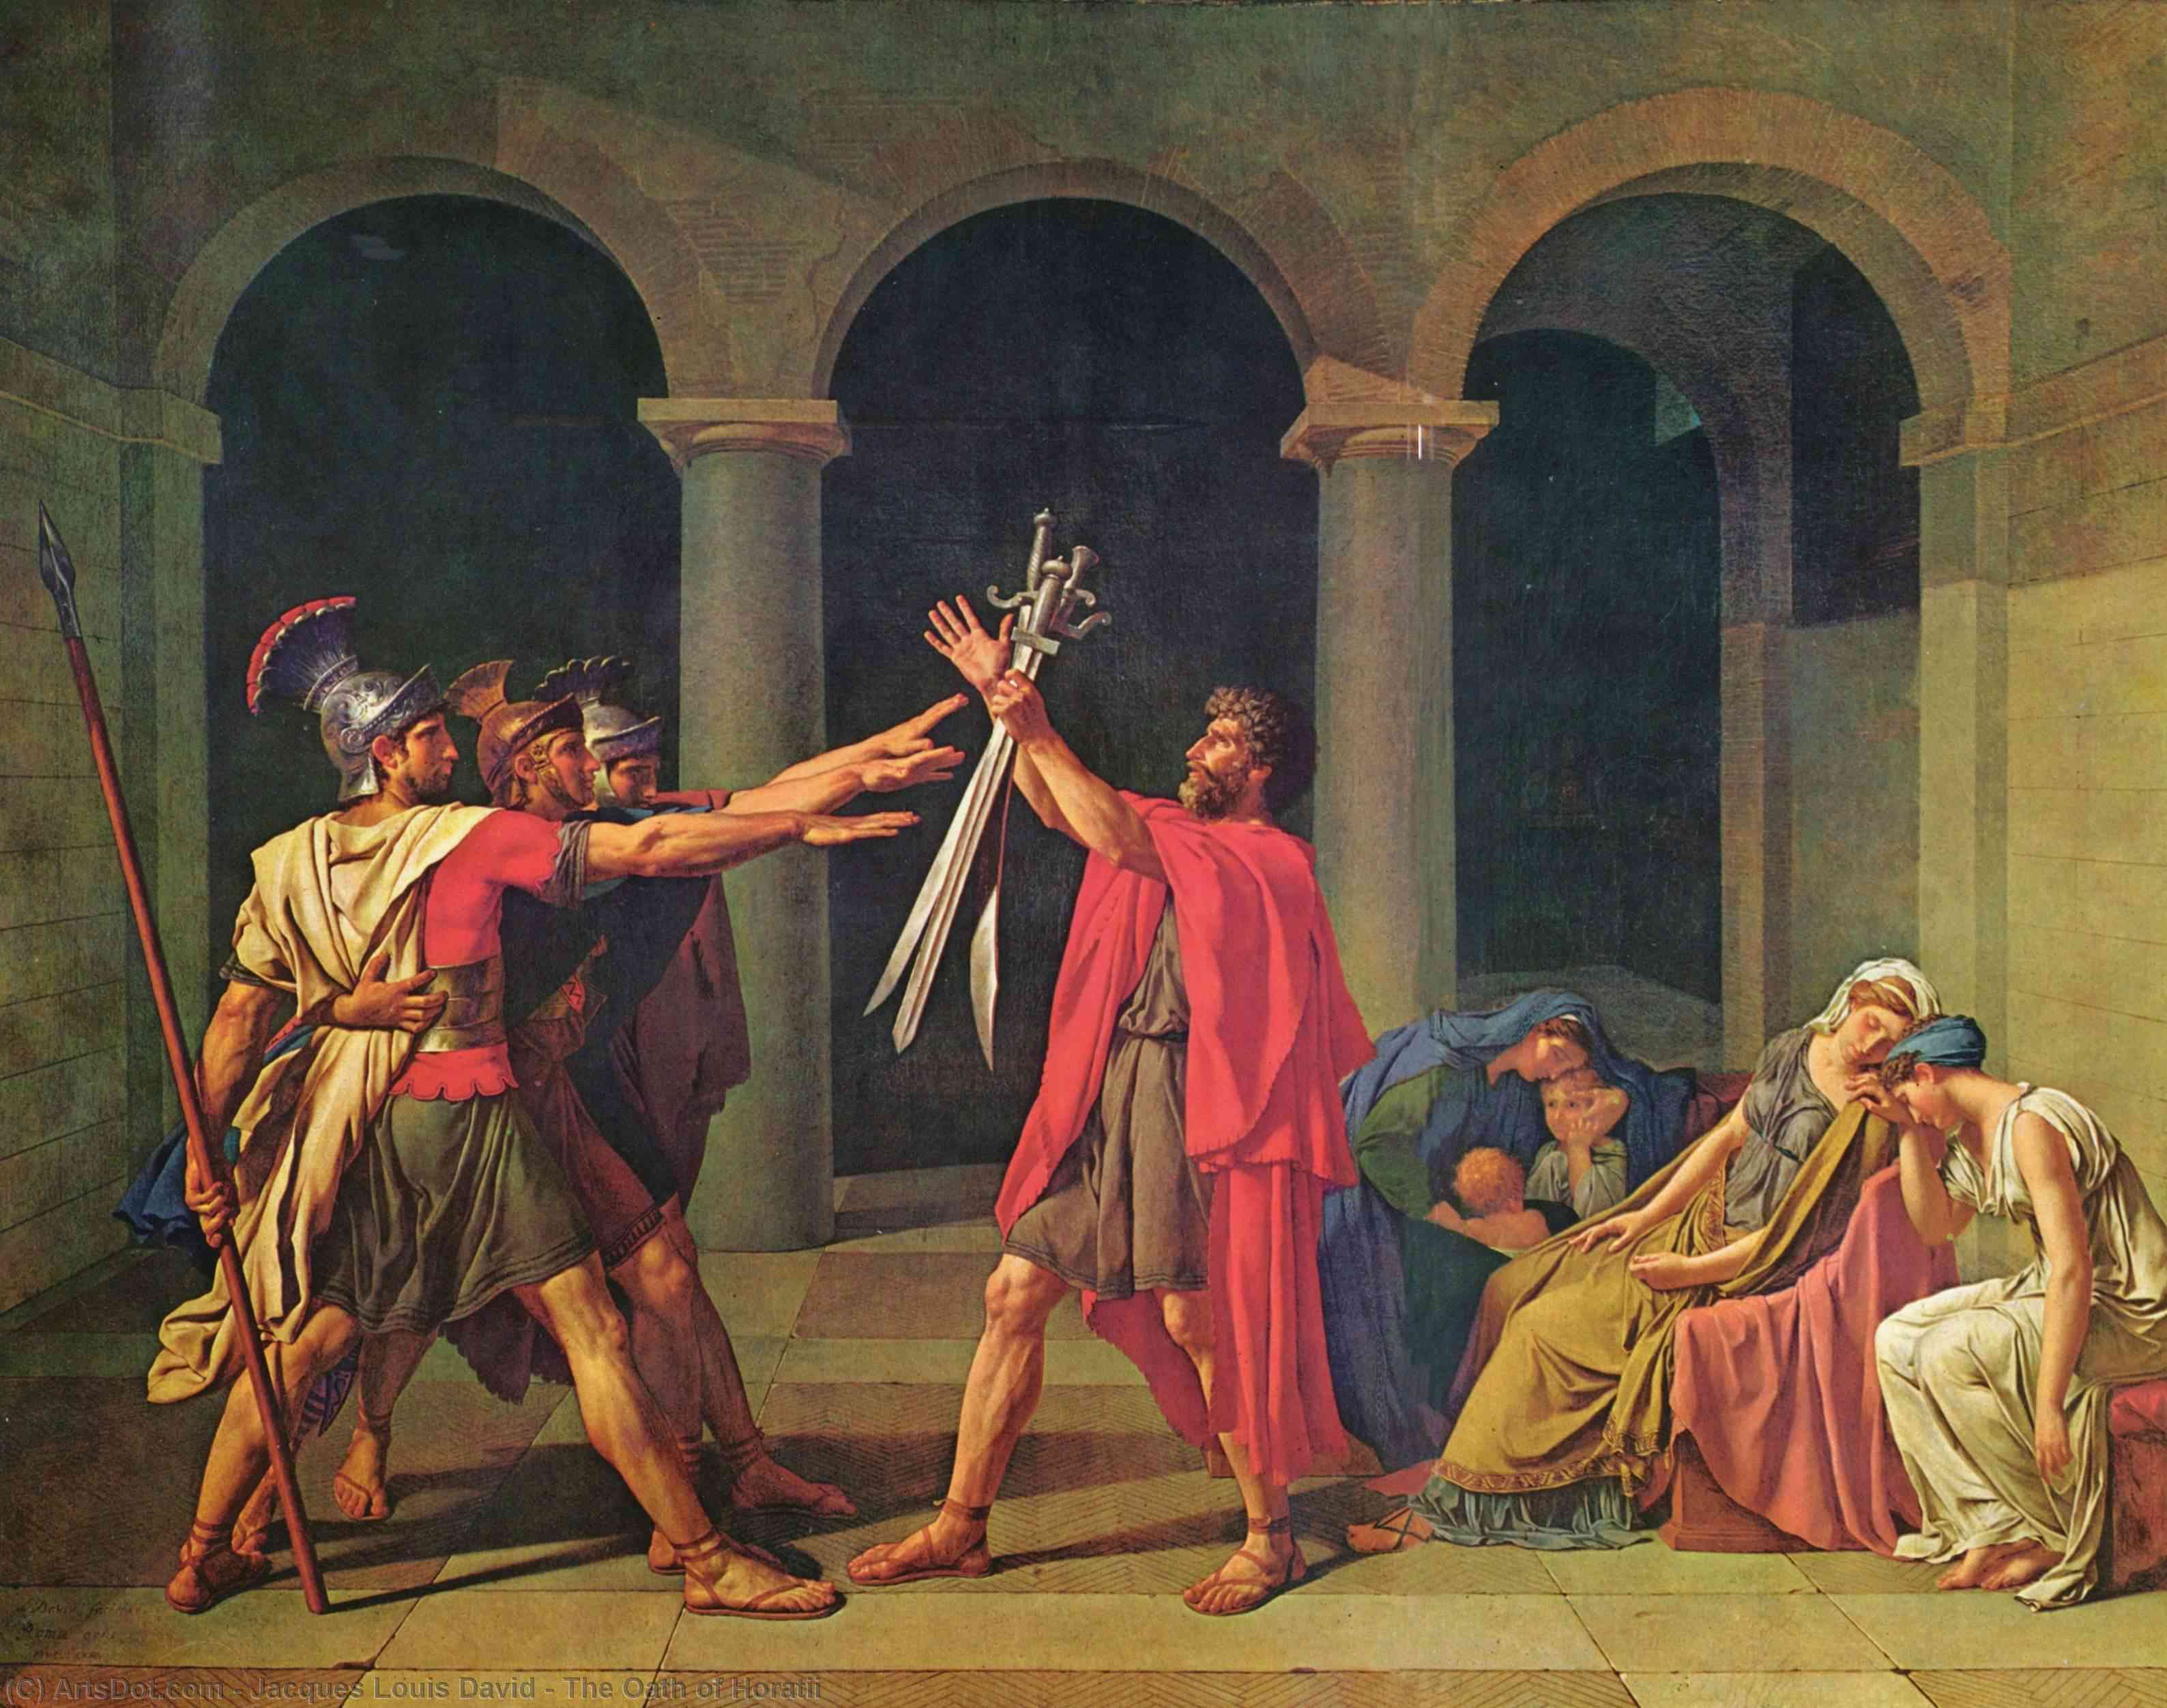 Wikioo.org - สารานุกรมวิจิตรศิลป์ - จิตรกรรม Jacques Louis David - The Oath of Horatii